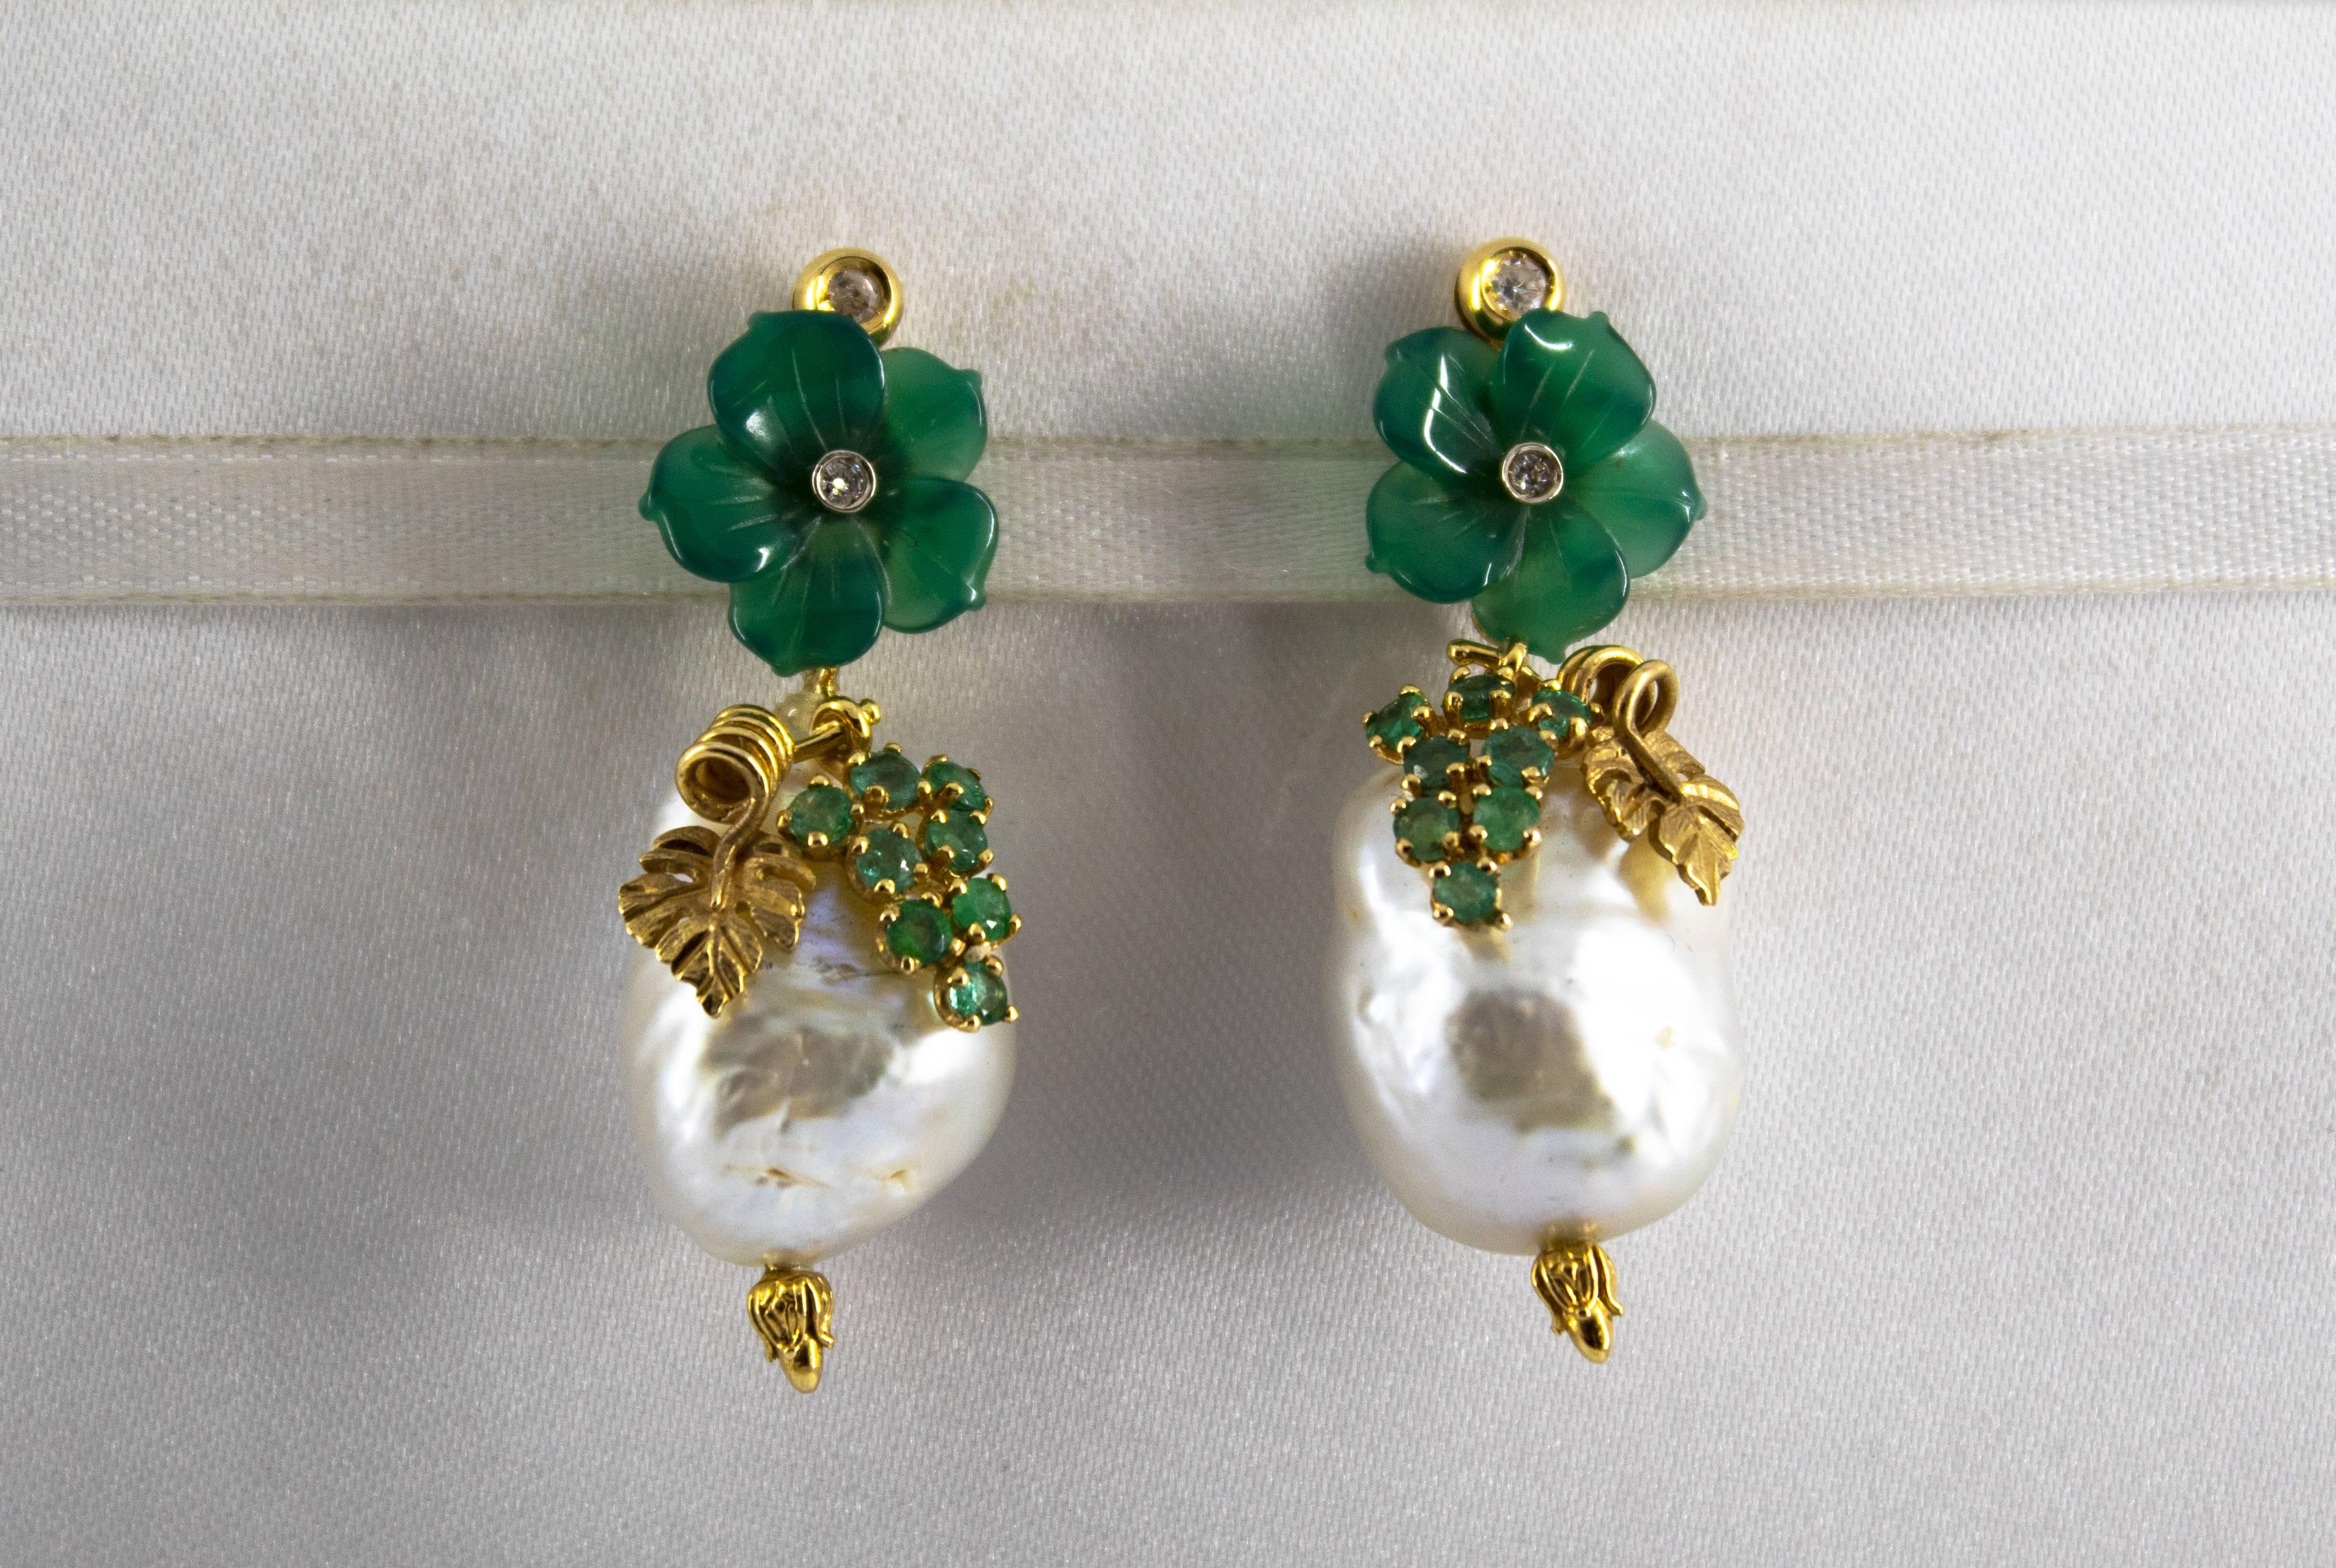 These Stud Earrings are made of 14K Yellow Gold.
These Earrings have 0.12 Carats of Diamonds.
These Earrings have 0.90 Carats of Emeralds.
These Earrings have also Pearls and Agate.
We're a workshop so every piece is handmade, customizable and